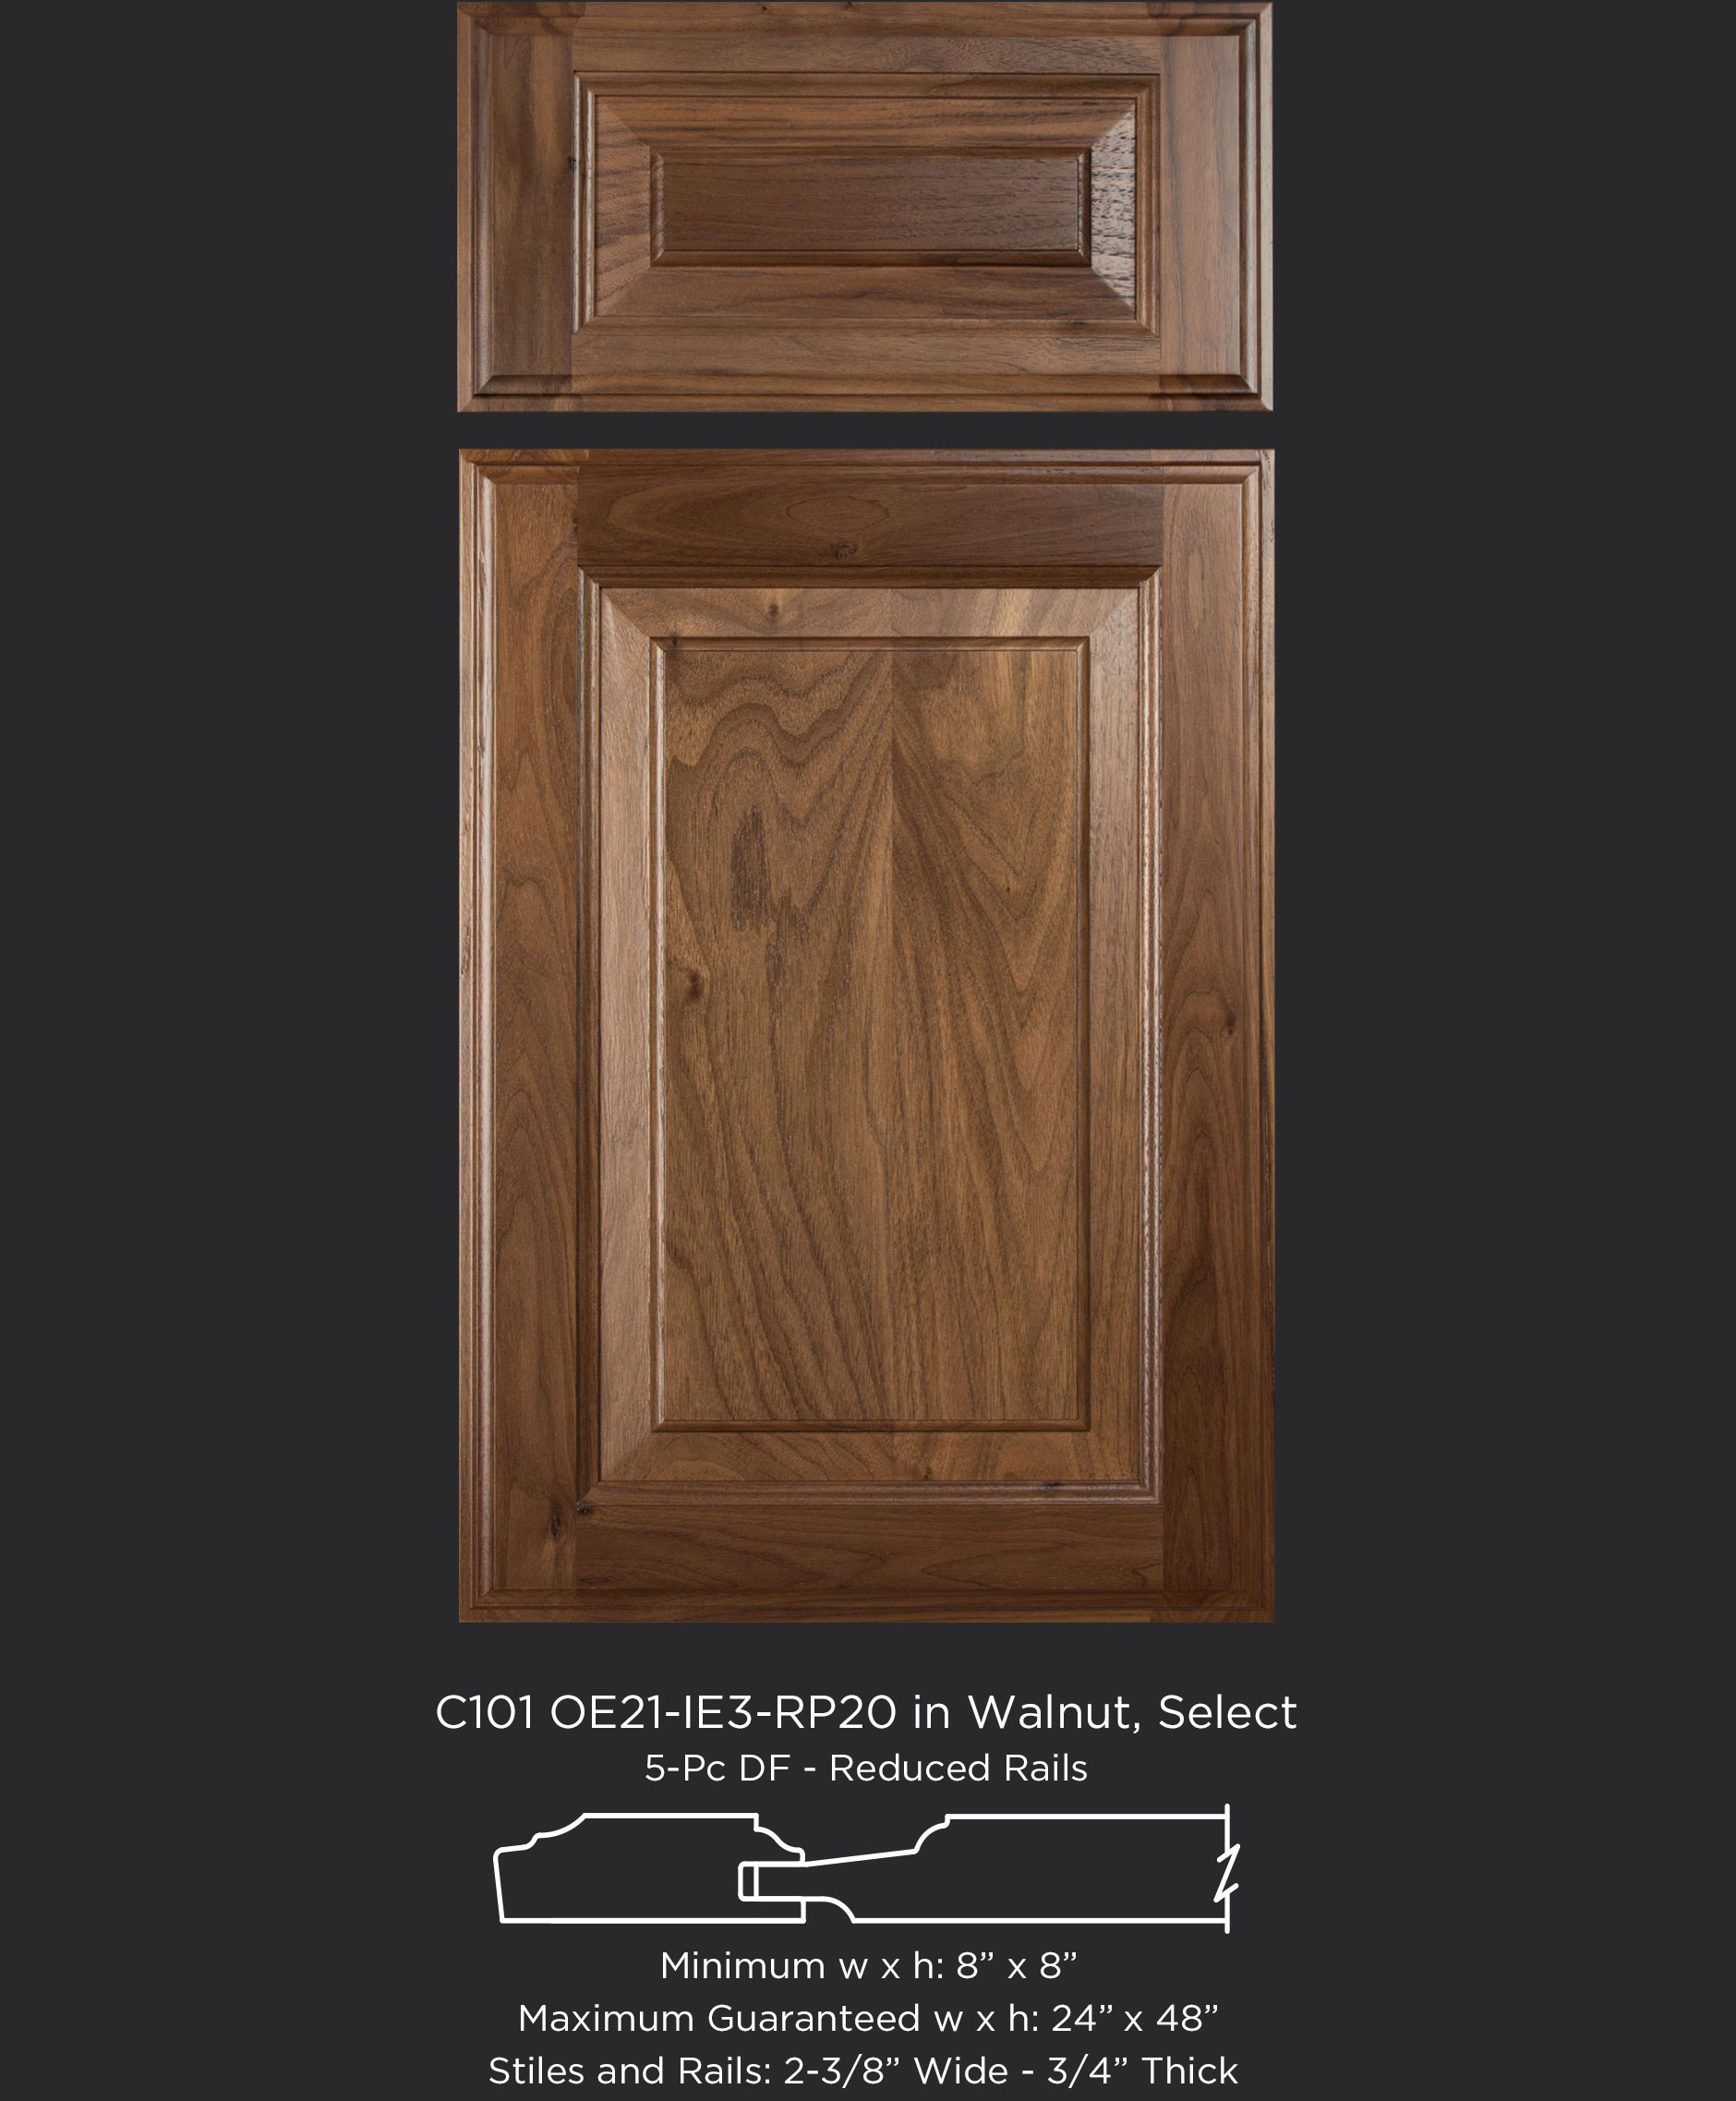 Cope and Stick Cabinet Door C101 OE21-IE3-RP20 Walnut, Select